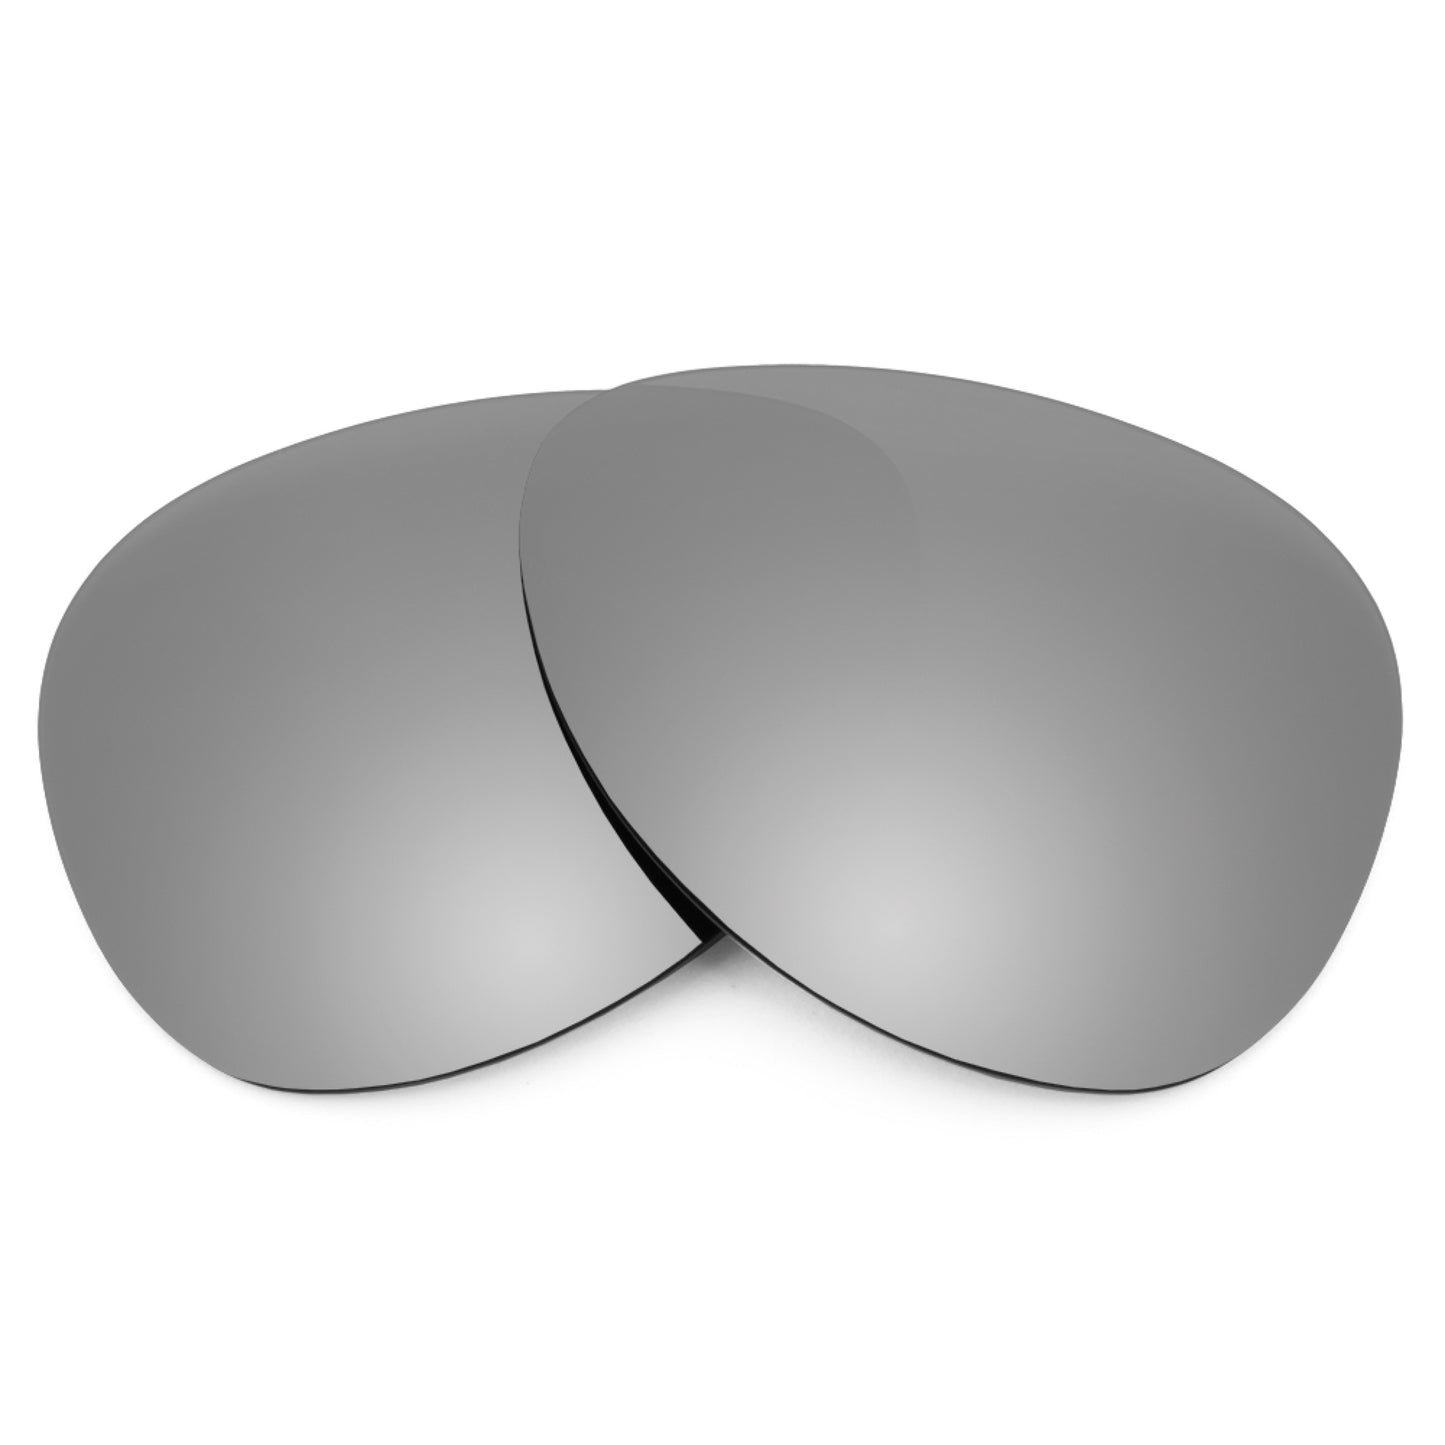 Revant replacement lenses for Ray-Ban RB8307 55mm Non-Polarized Titanium